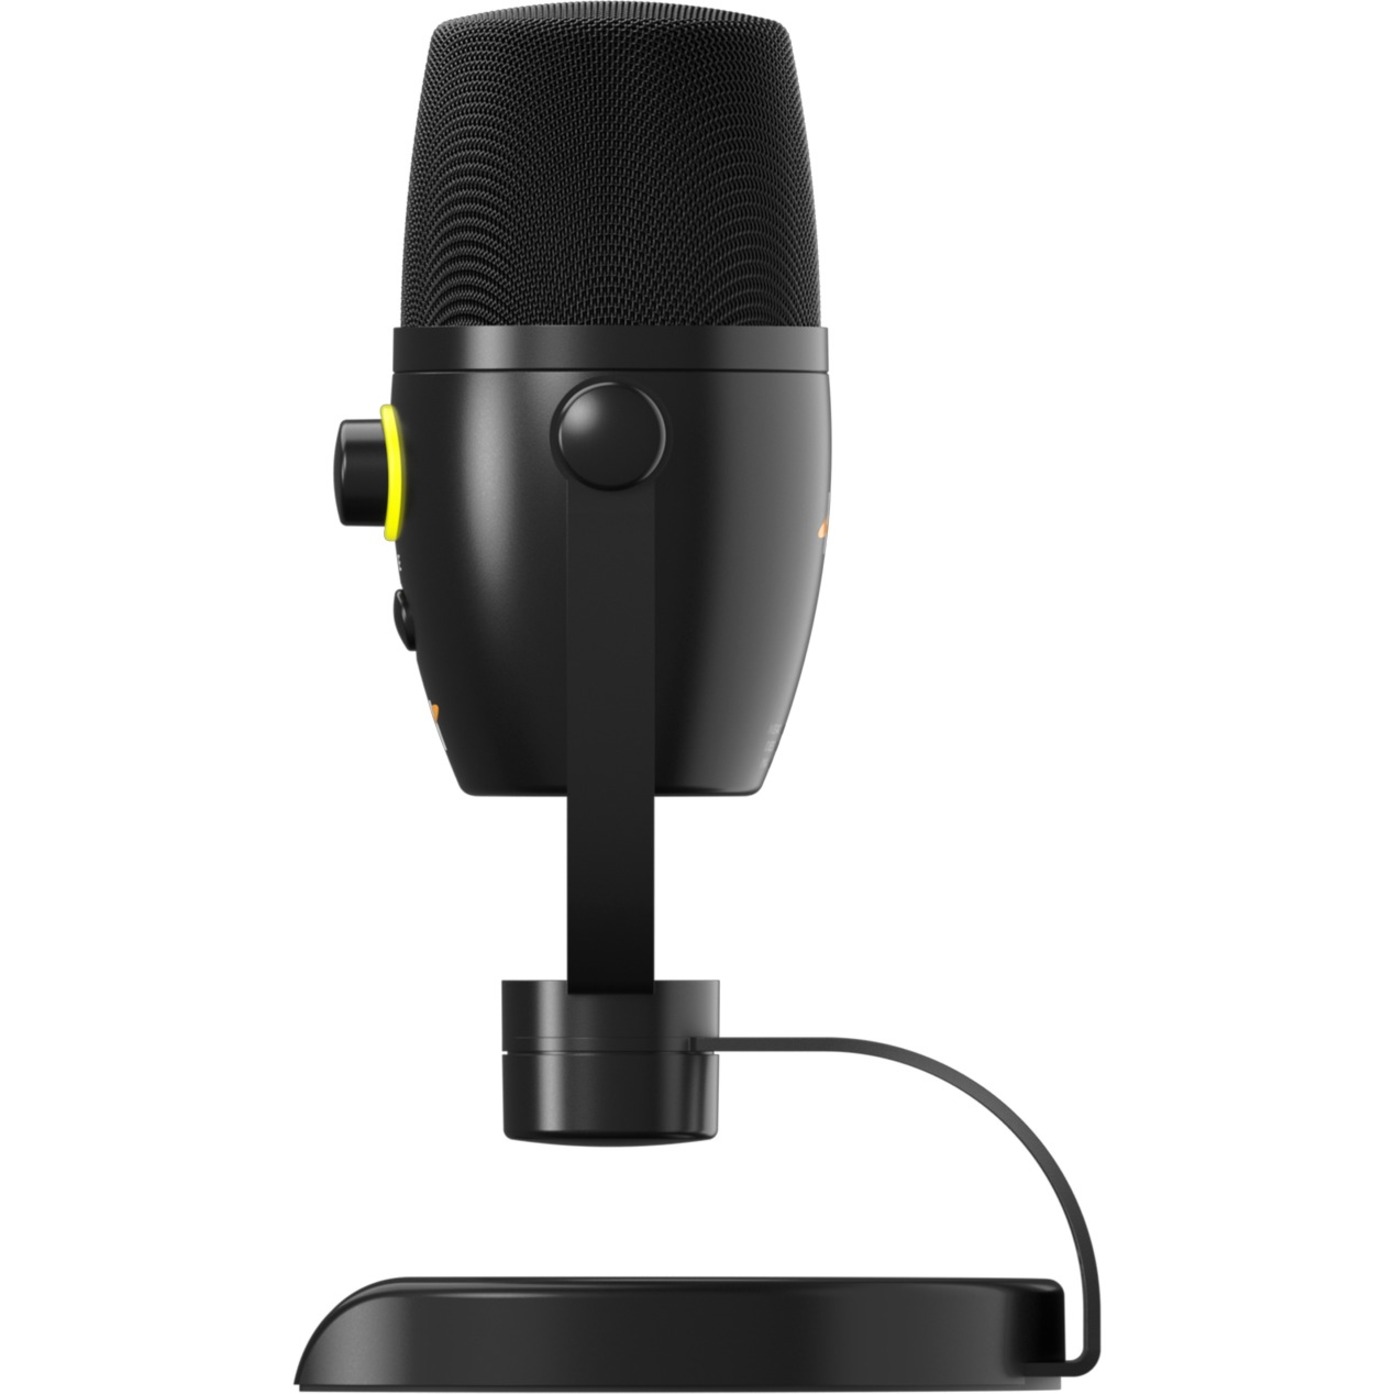 Neat Microphones Bumblebee II Wired Condenser Microphone - Black - image 2 of 6